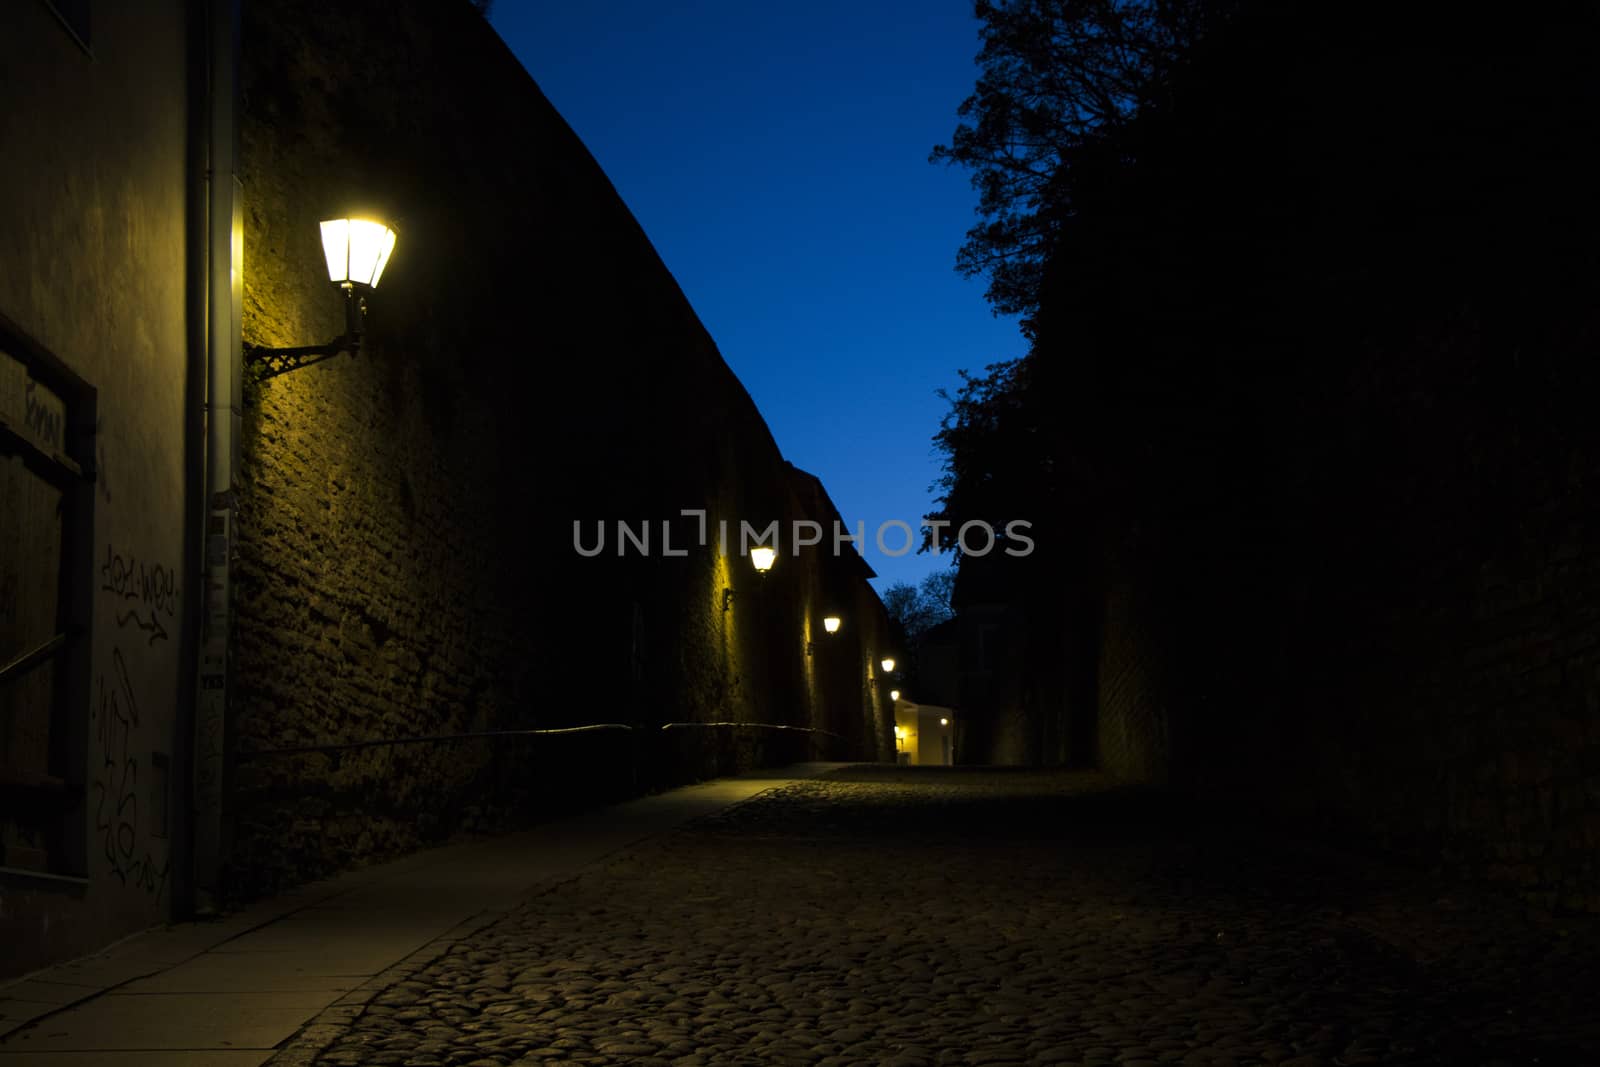 night street situation, street light and stone road. by Taidundua